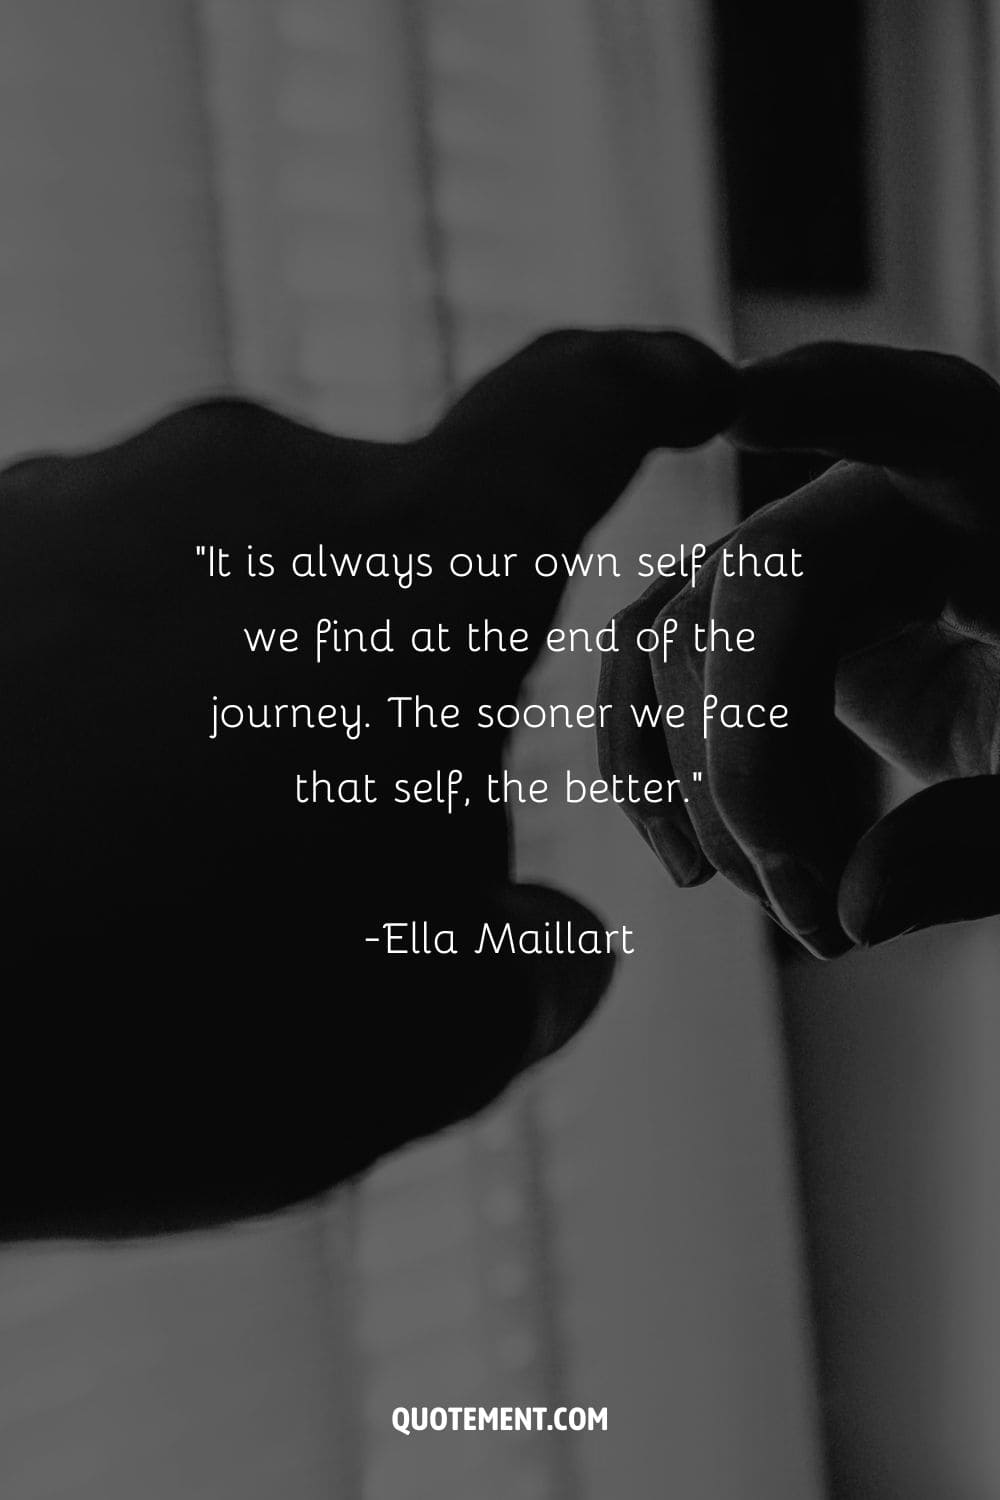 It is always our own self that we find at the end of the journey. The sooner we face that self, the better. – Ella Maillart